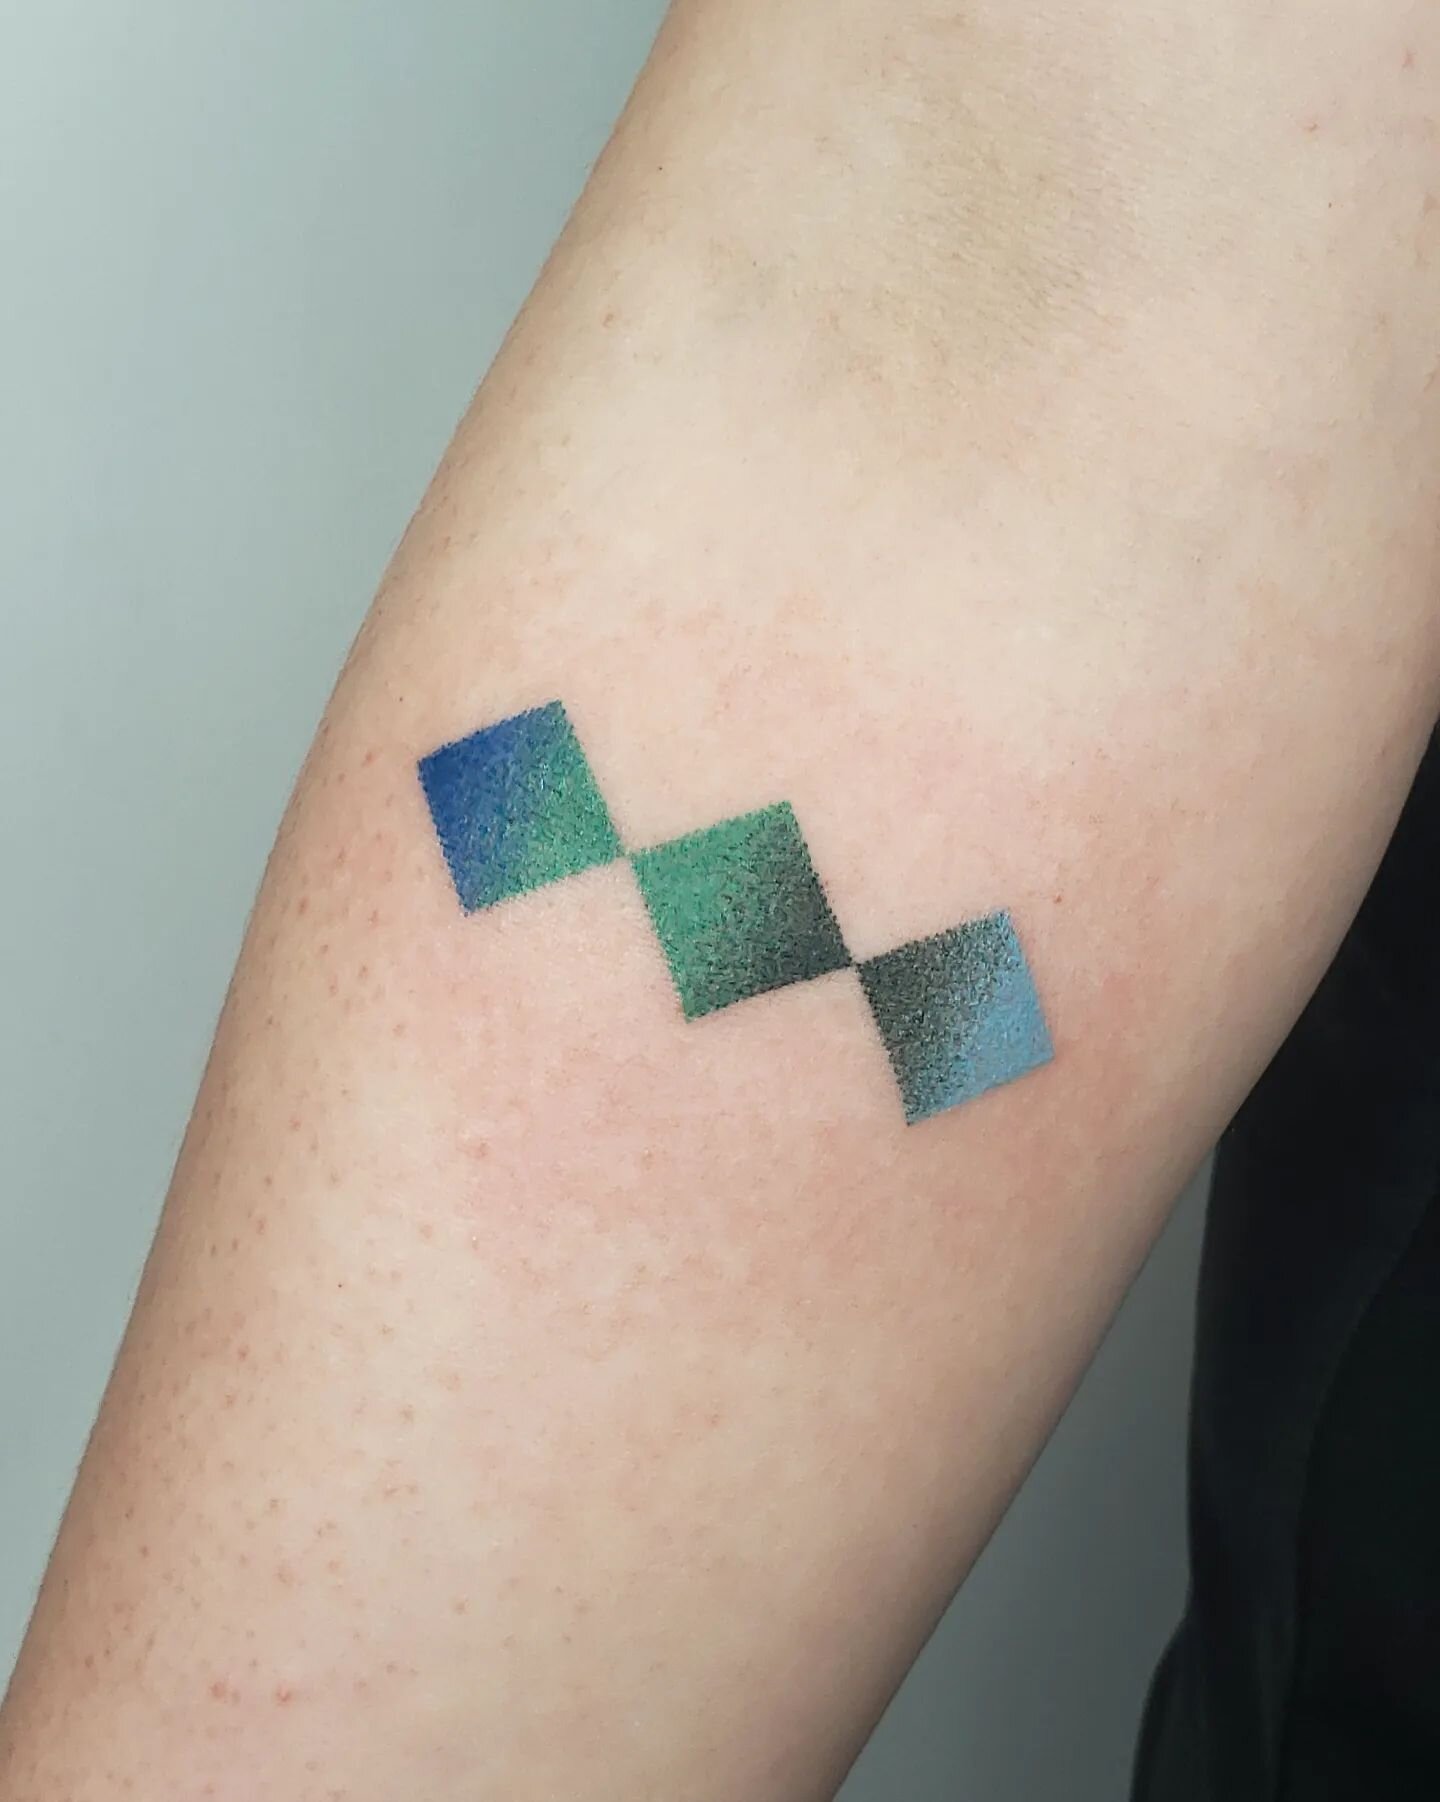 🔷️🔷️🔷️

Thanks Mady for coming back for another tattoo
It is always a pleasure ♡
.
.
.
#chicago #handpoke #tattoo #colorflash #handpokedtattoo #machinefree #tattooflash #chicagotattooartist #chicagohandpoke #chicagostickandpoke #illustratorsoninst